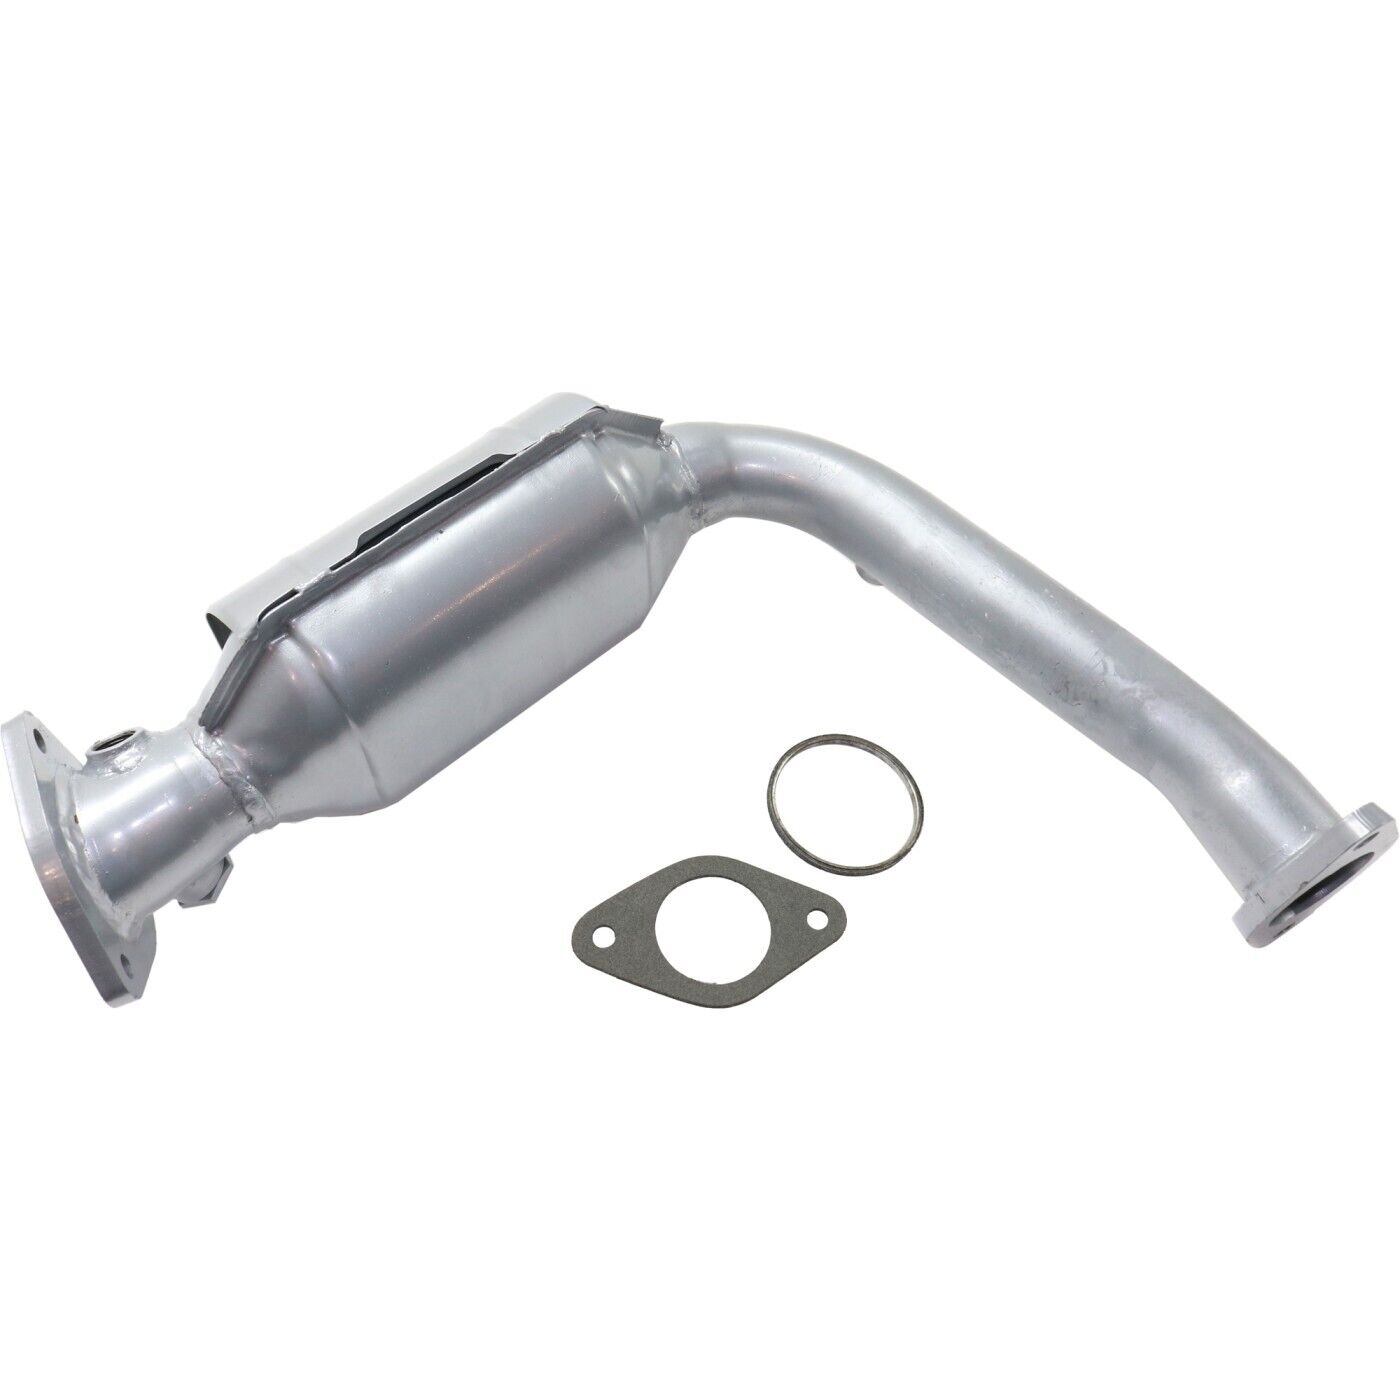 Front Catalytic Converter 46-State Legal For 2.0L Manual Trans 00-04 Ford Focus